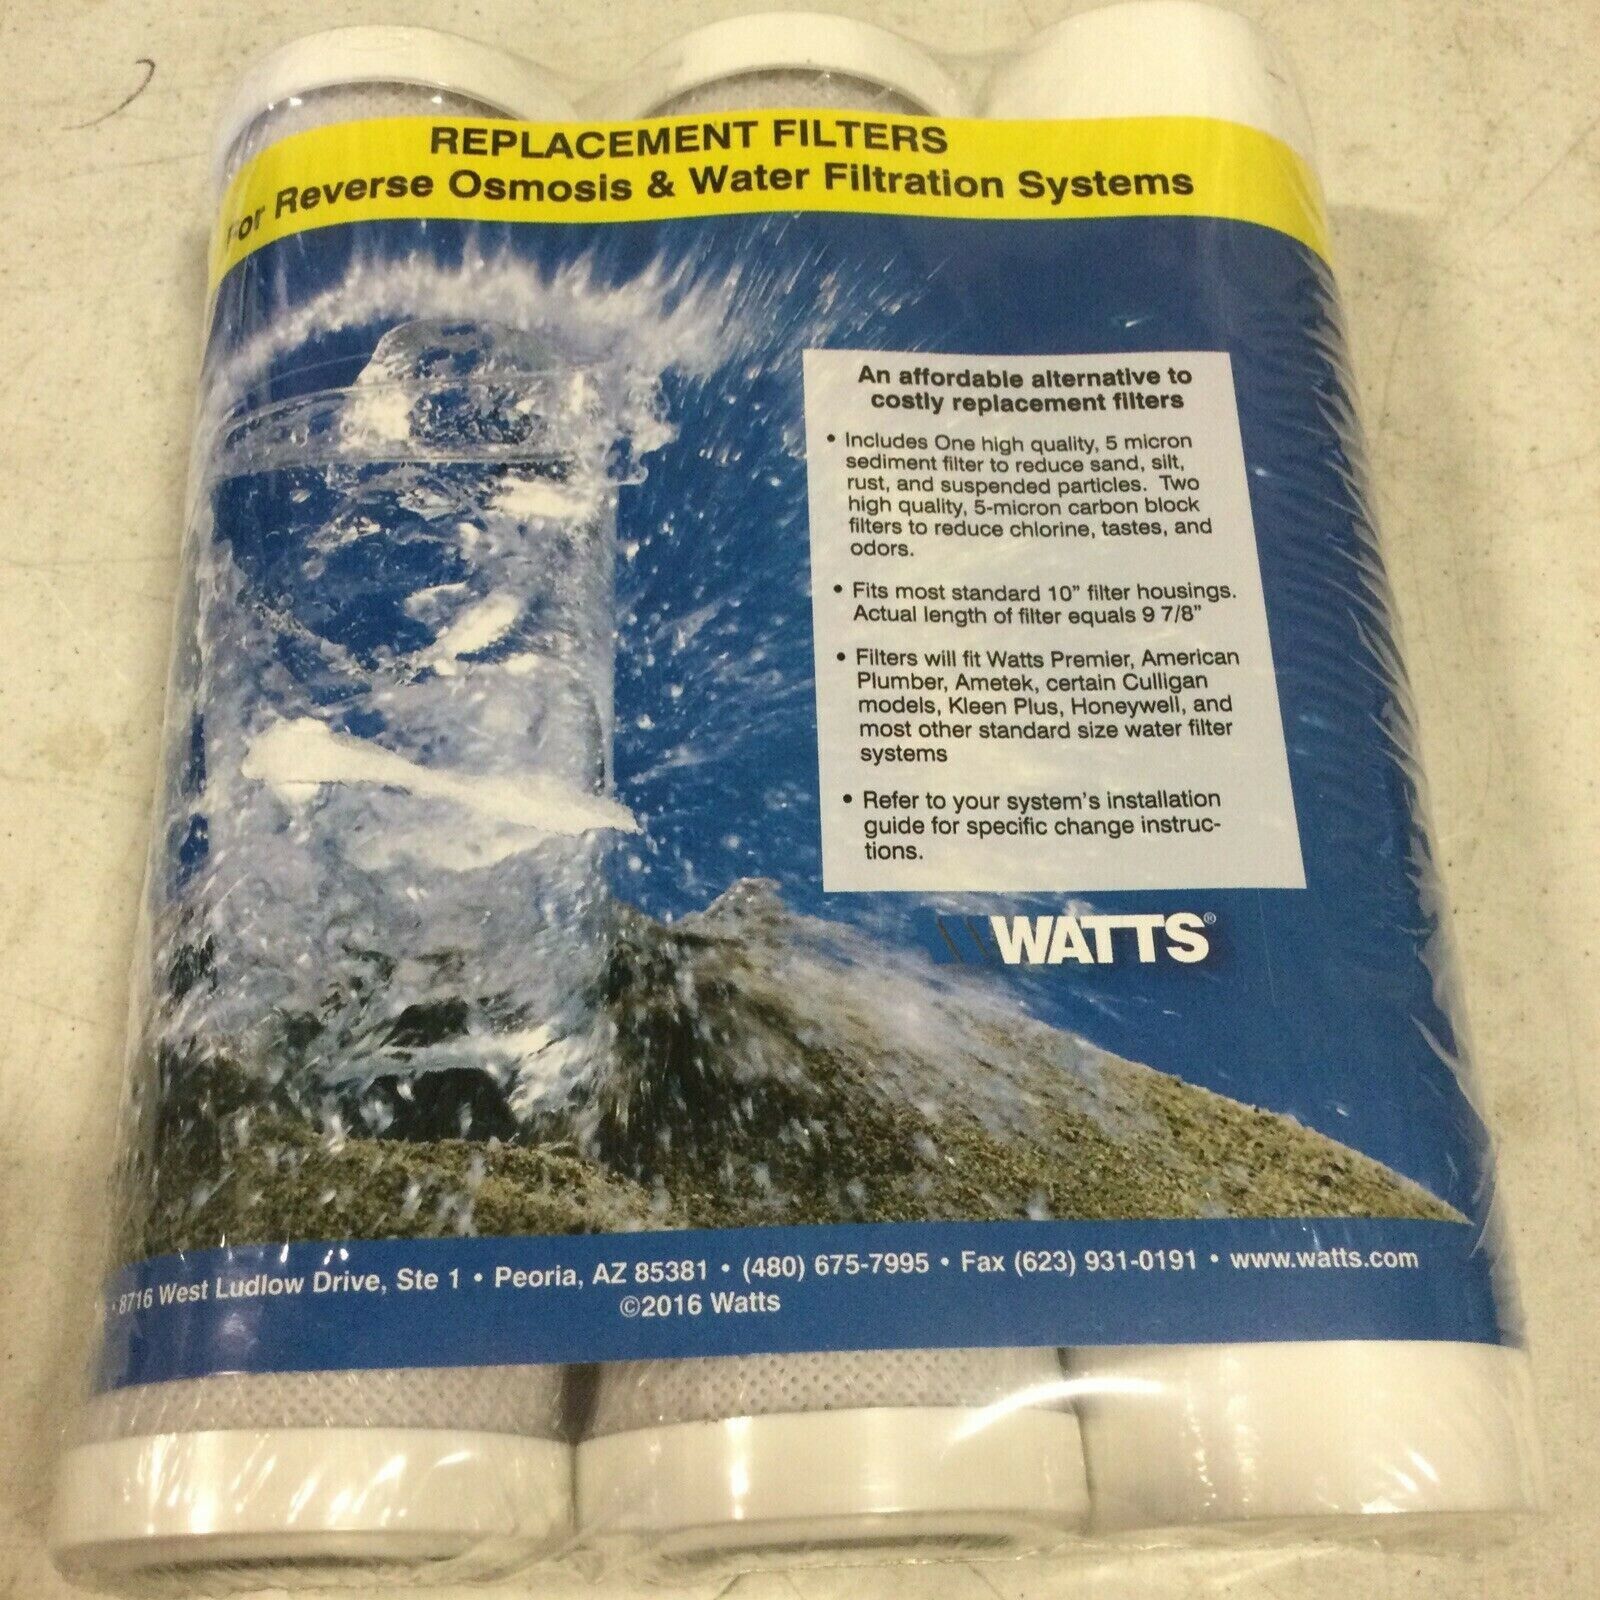 For Under Sink 10" Filter Replacement